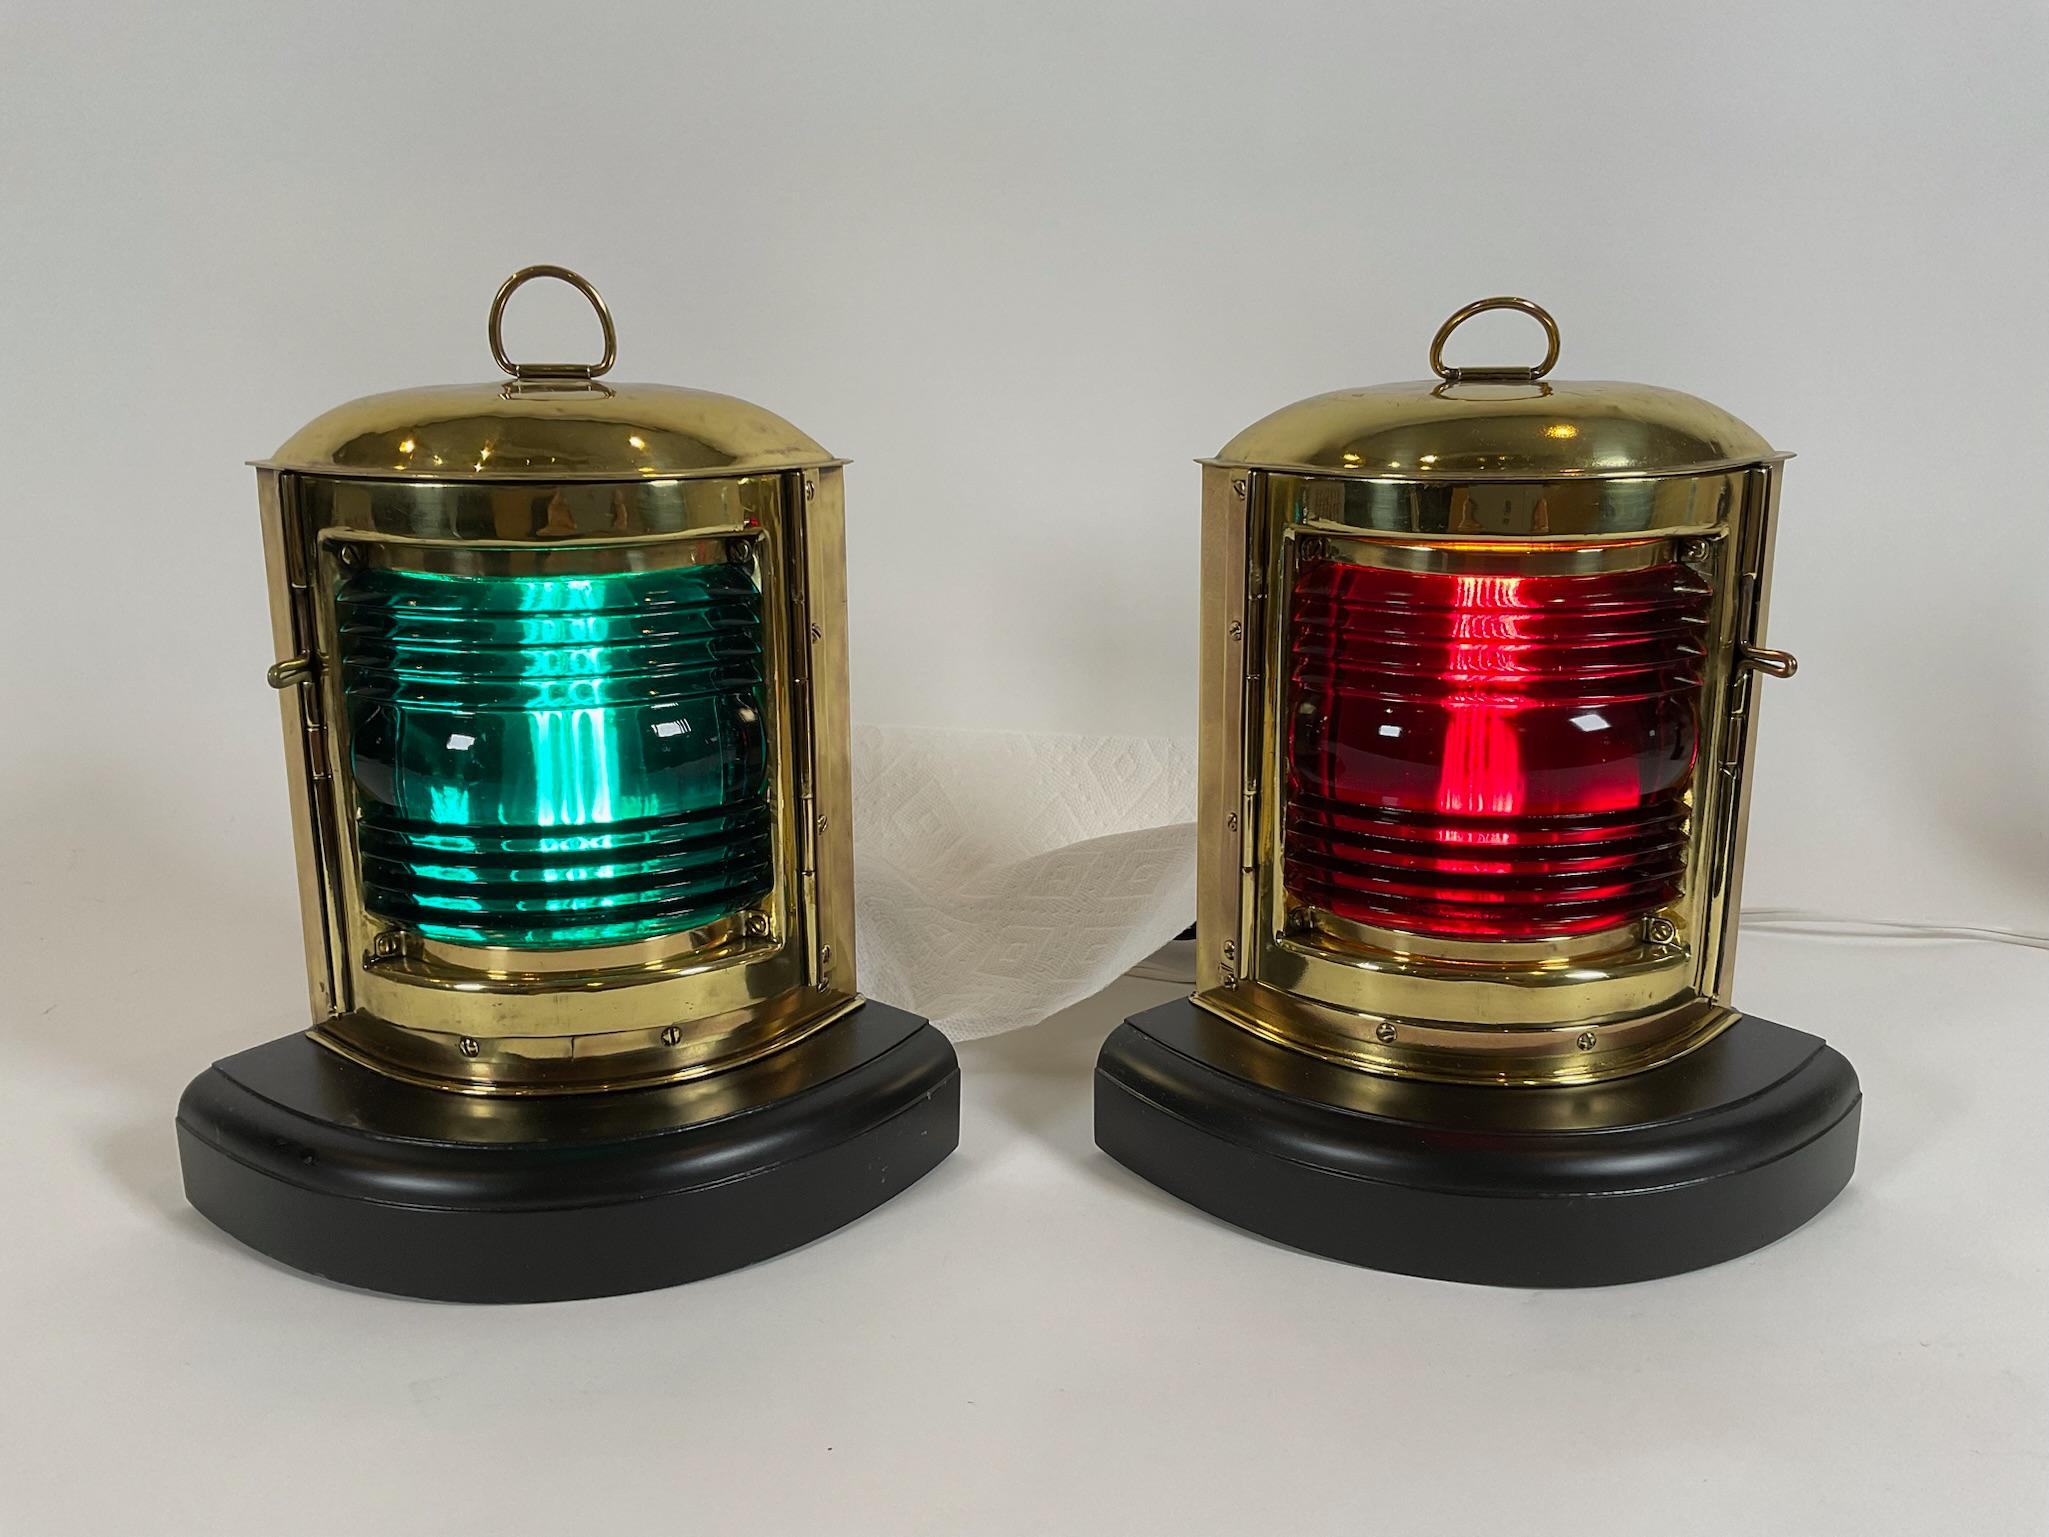 Pair of Port and Starboard Ships Lanterns in Highly Polished and Lacquered Brass. Fitted with richly colored red and green lenses. Mounted to thick wood bases. Wired.

Weight: 5 lbs. EA
Overall Dimensions: 11